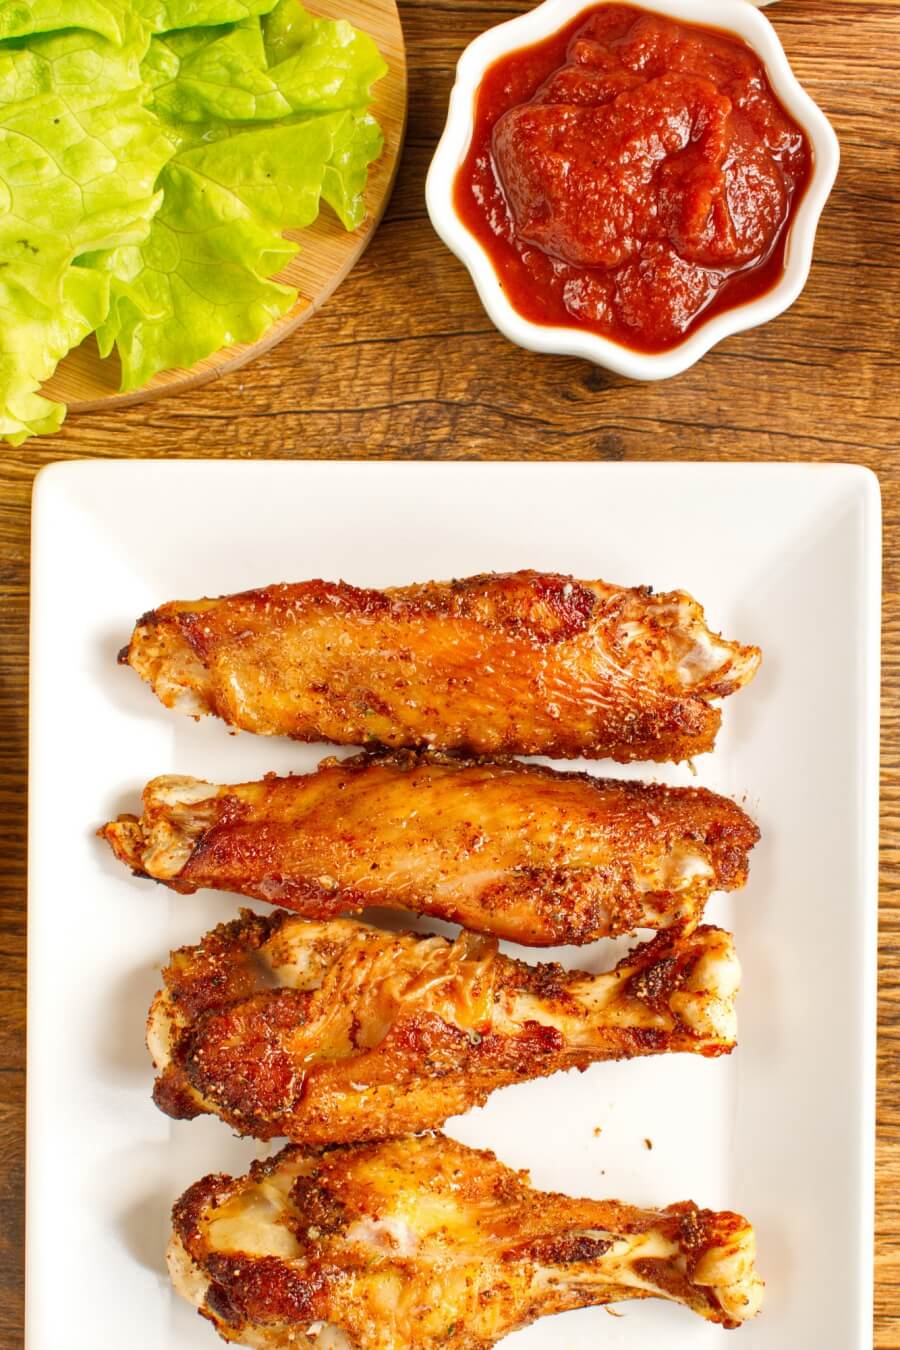 https://cook.me/wp-content/uploads/2019/03/How-to-Cook-Pan-Fried-Turkey-Wings-Recipe-Easy-Spicy-Deep-Fried-Turkey-Wings-Recipe-Fried-Turkey-Wings-12.jpg